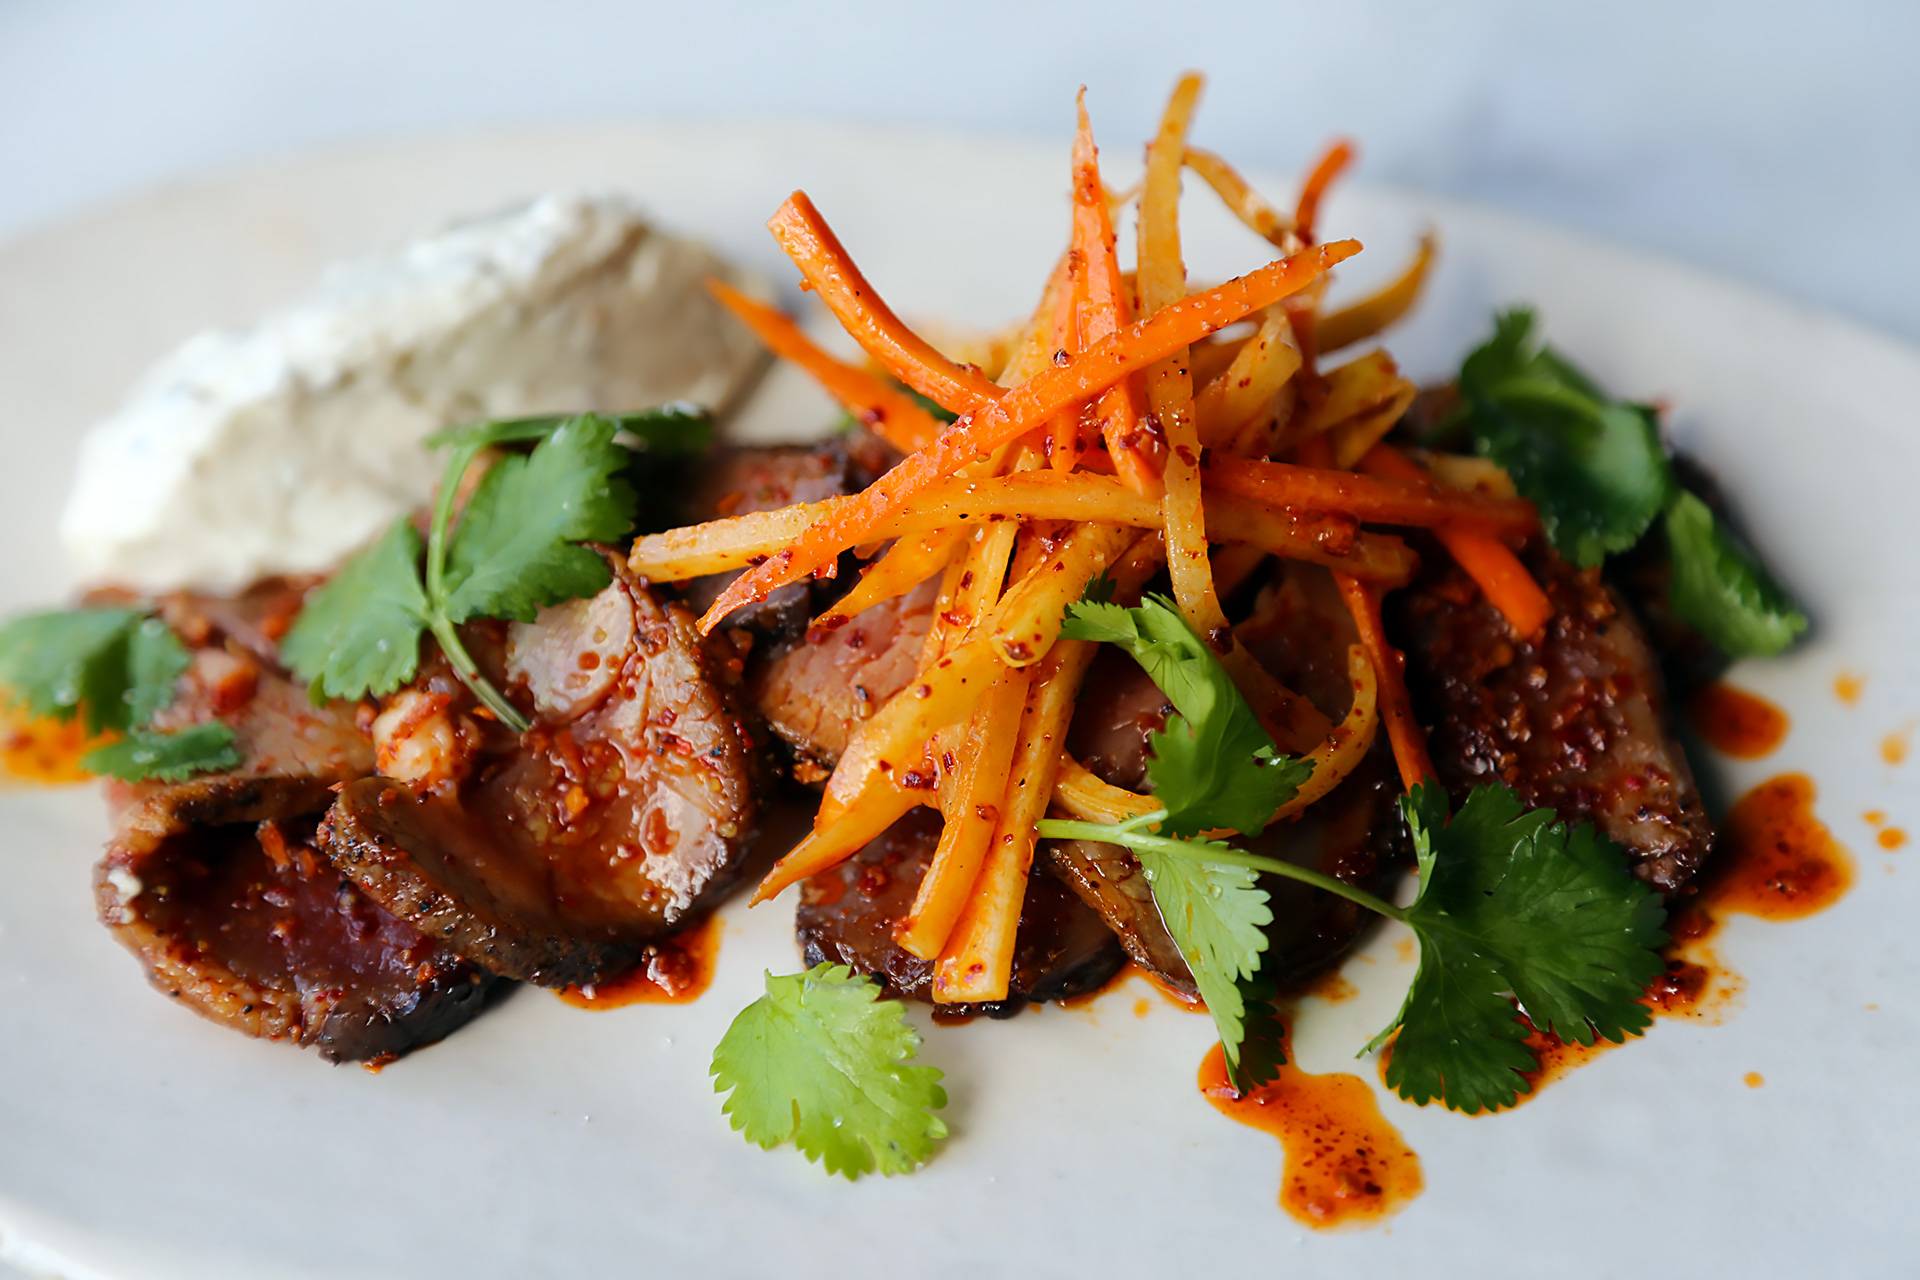 Lamb leg with peppercorn labneh and carrot salad